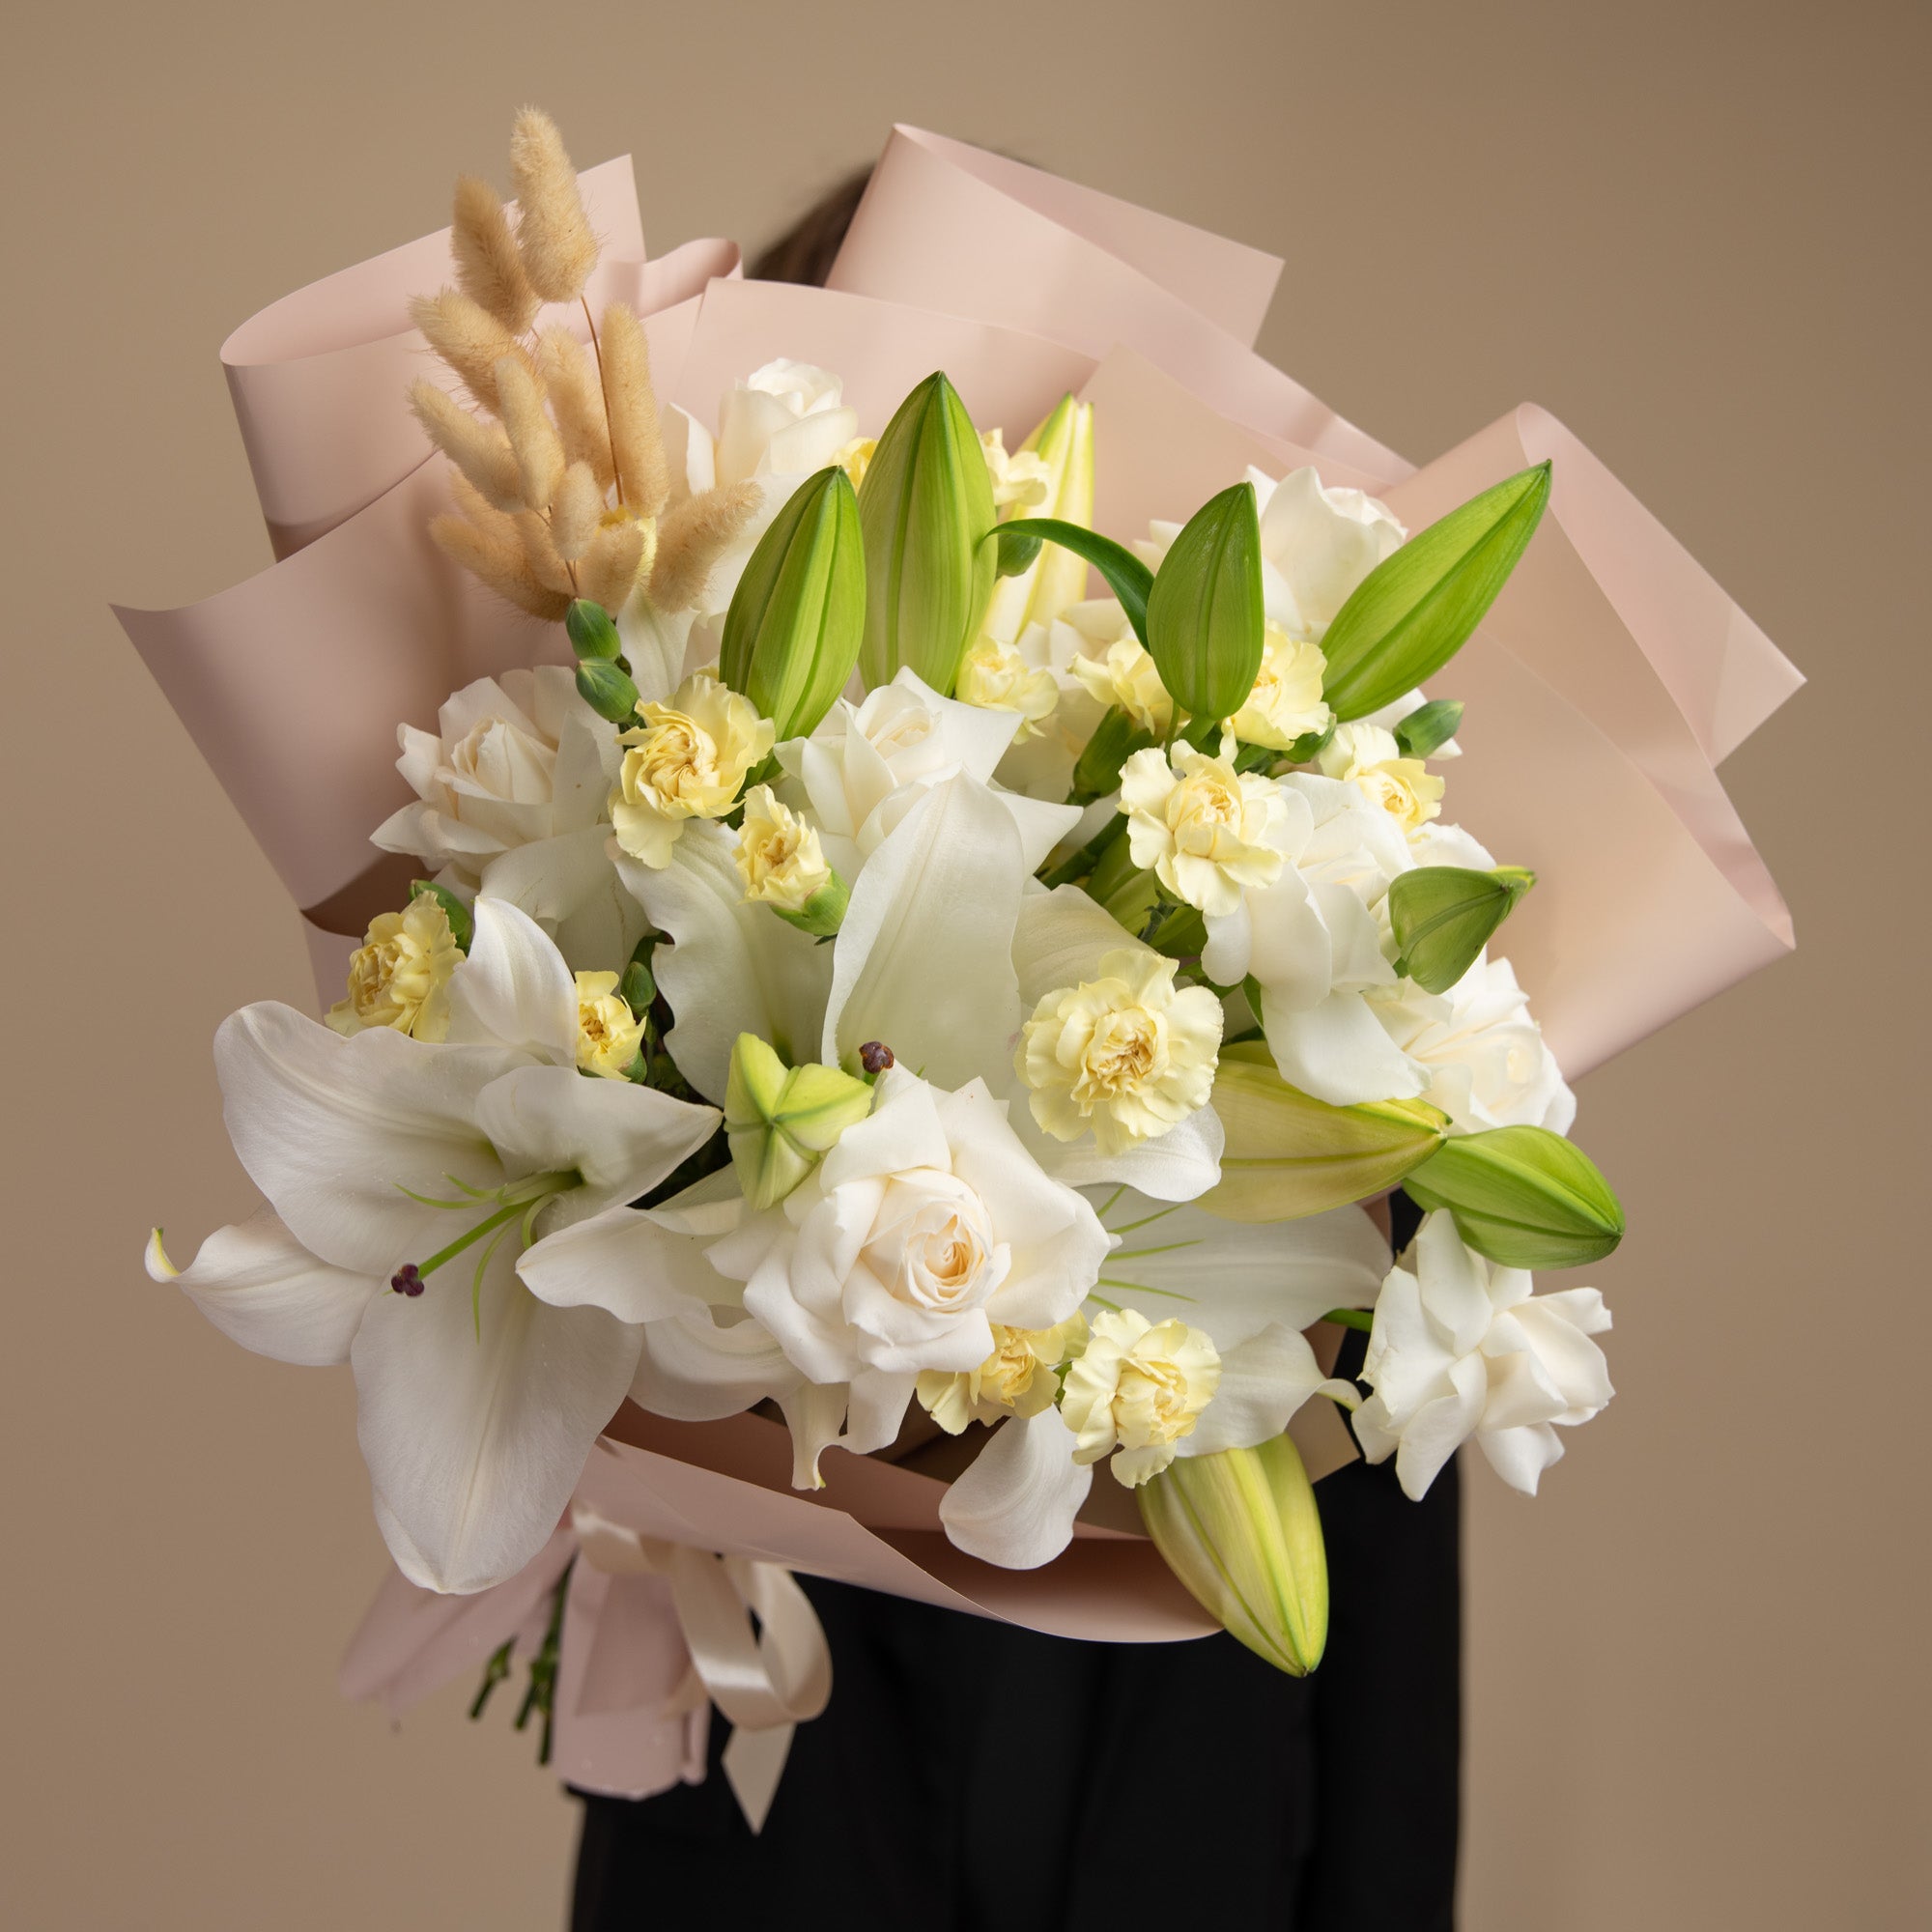 Bouquet with lilies and white roses